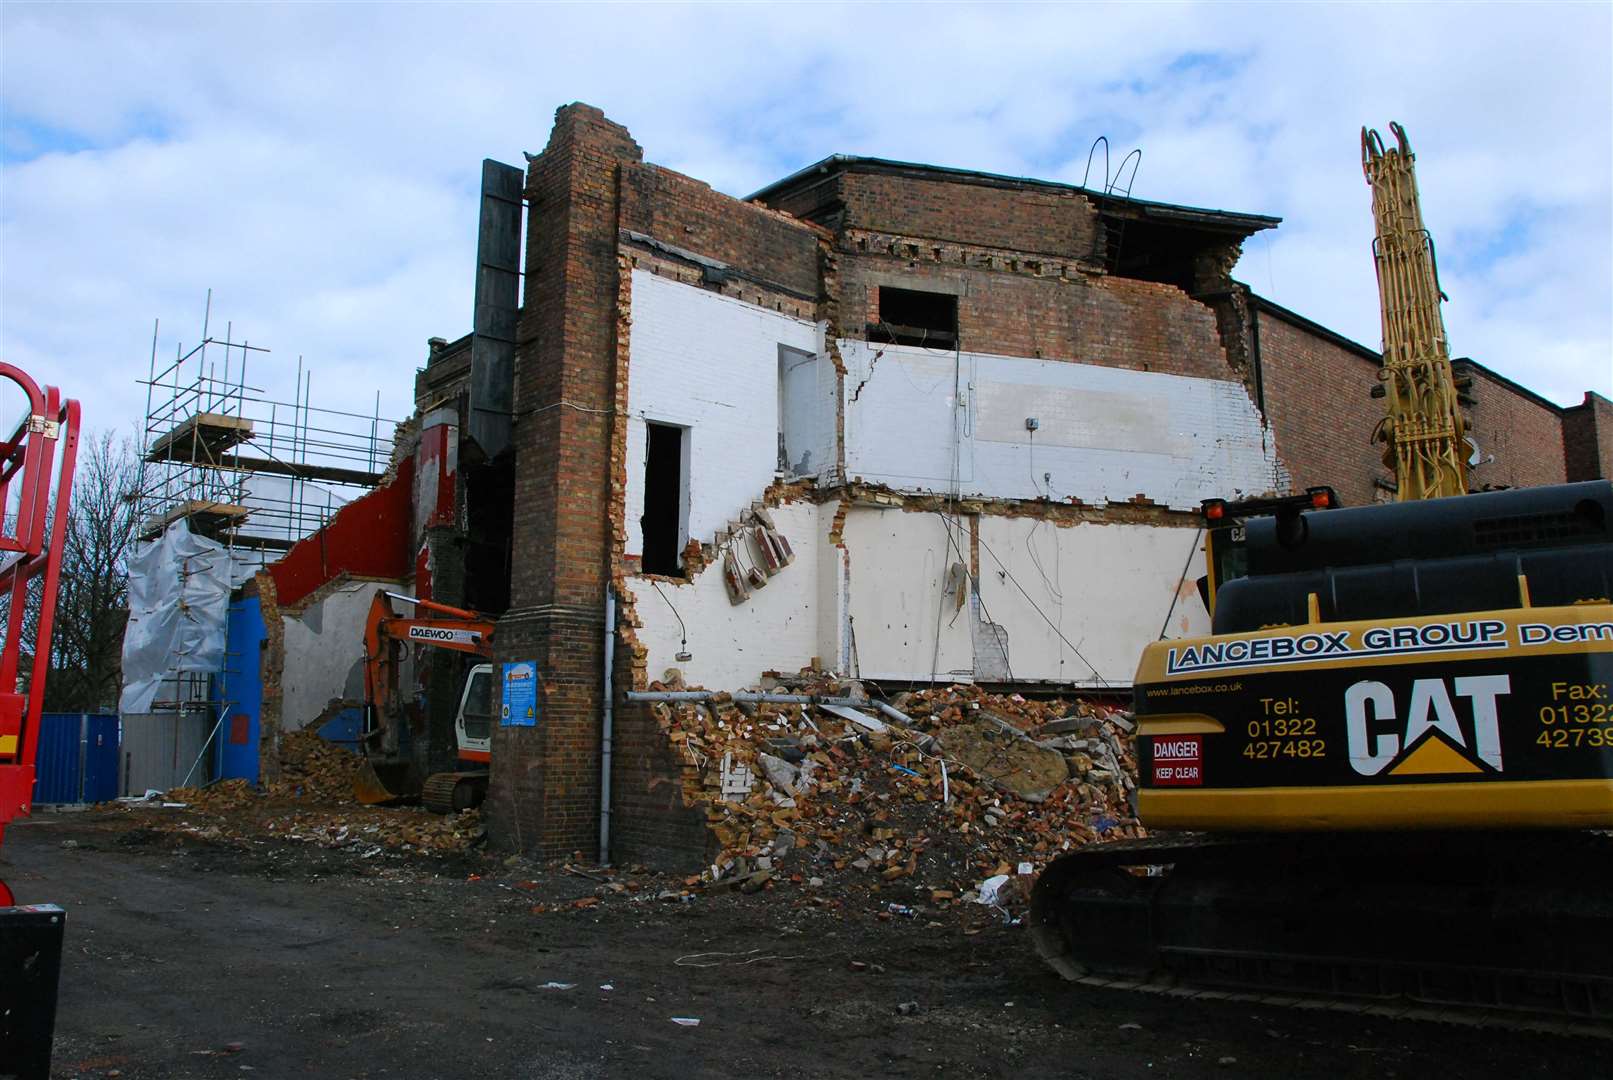 A demolition vehicle prepares to knock down the former Woodies nightclub and cinema in Sheerness